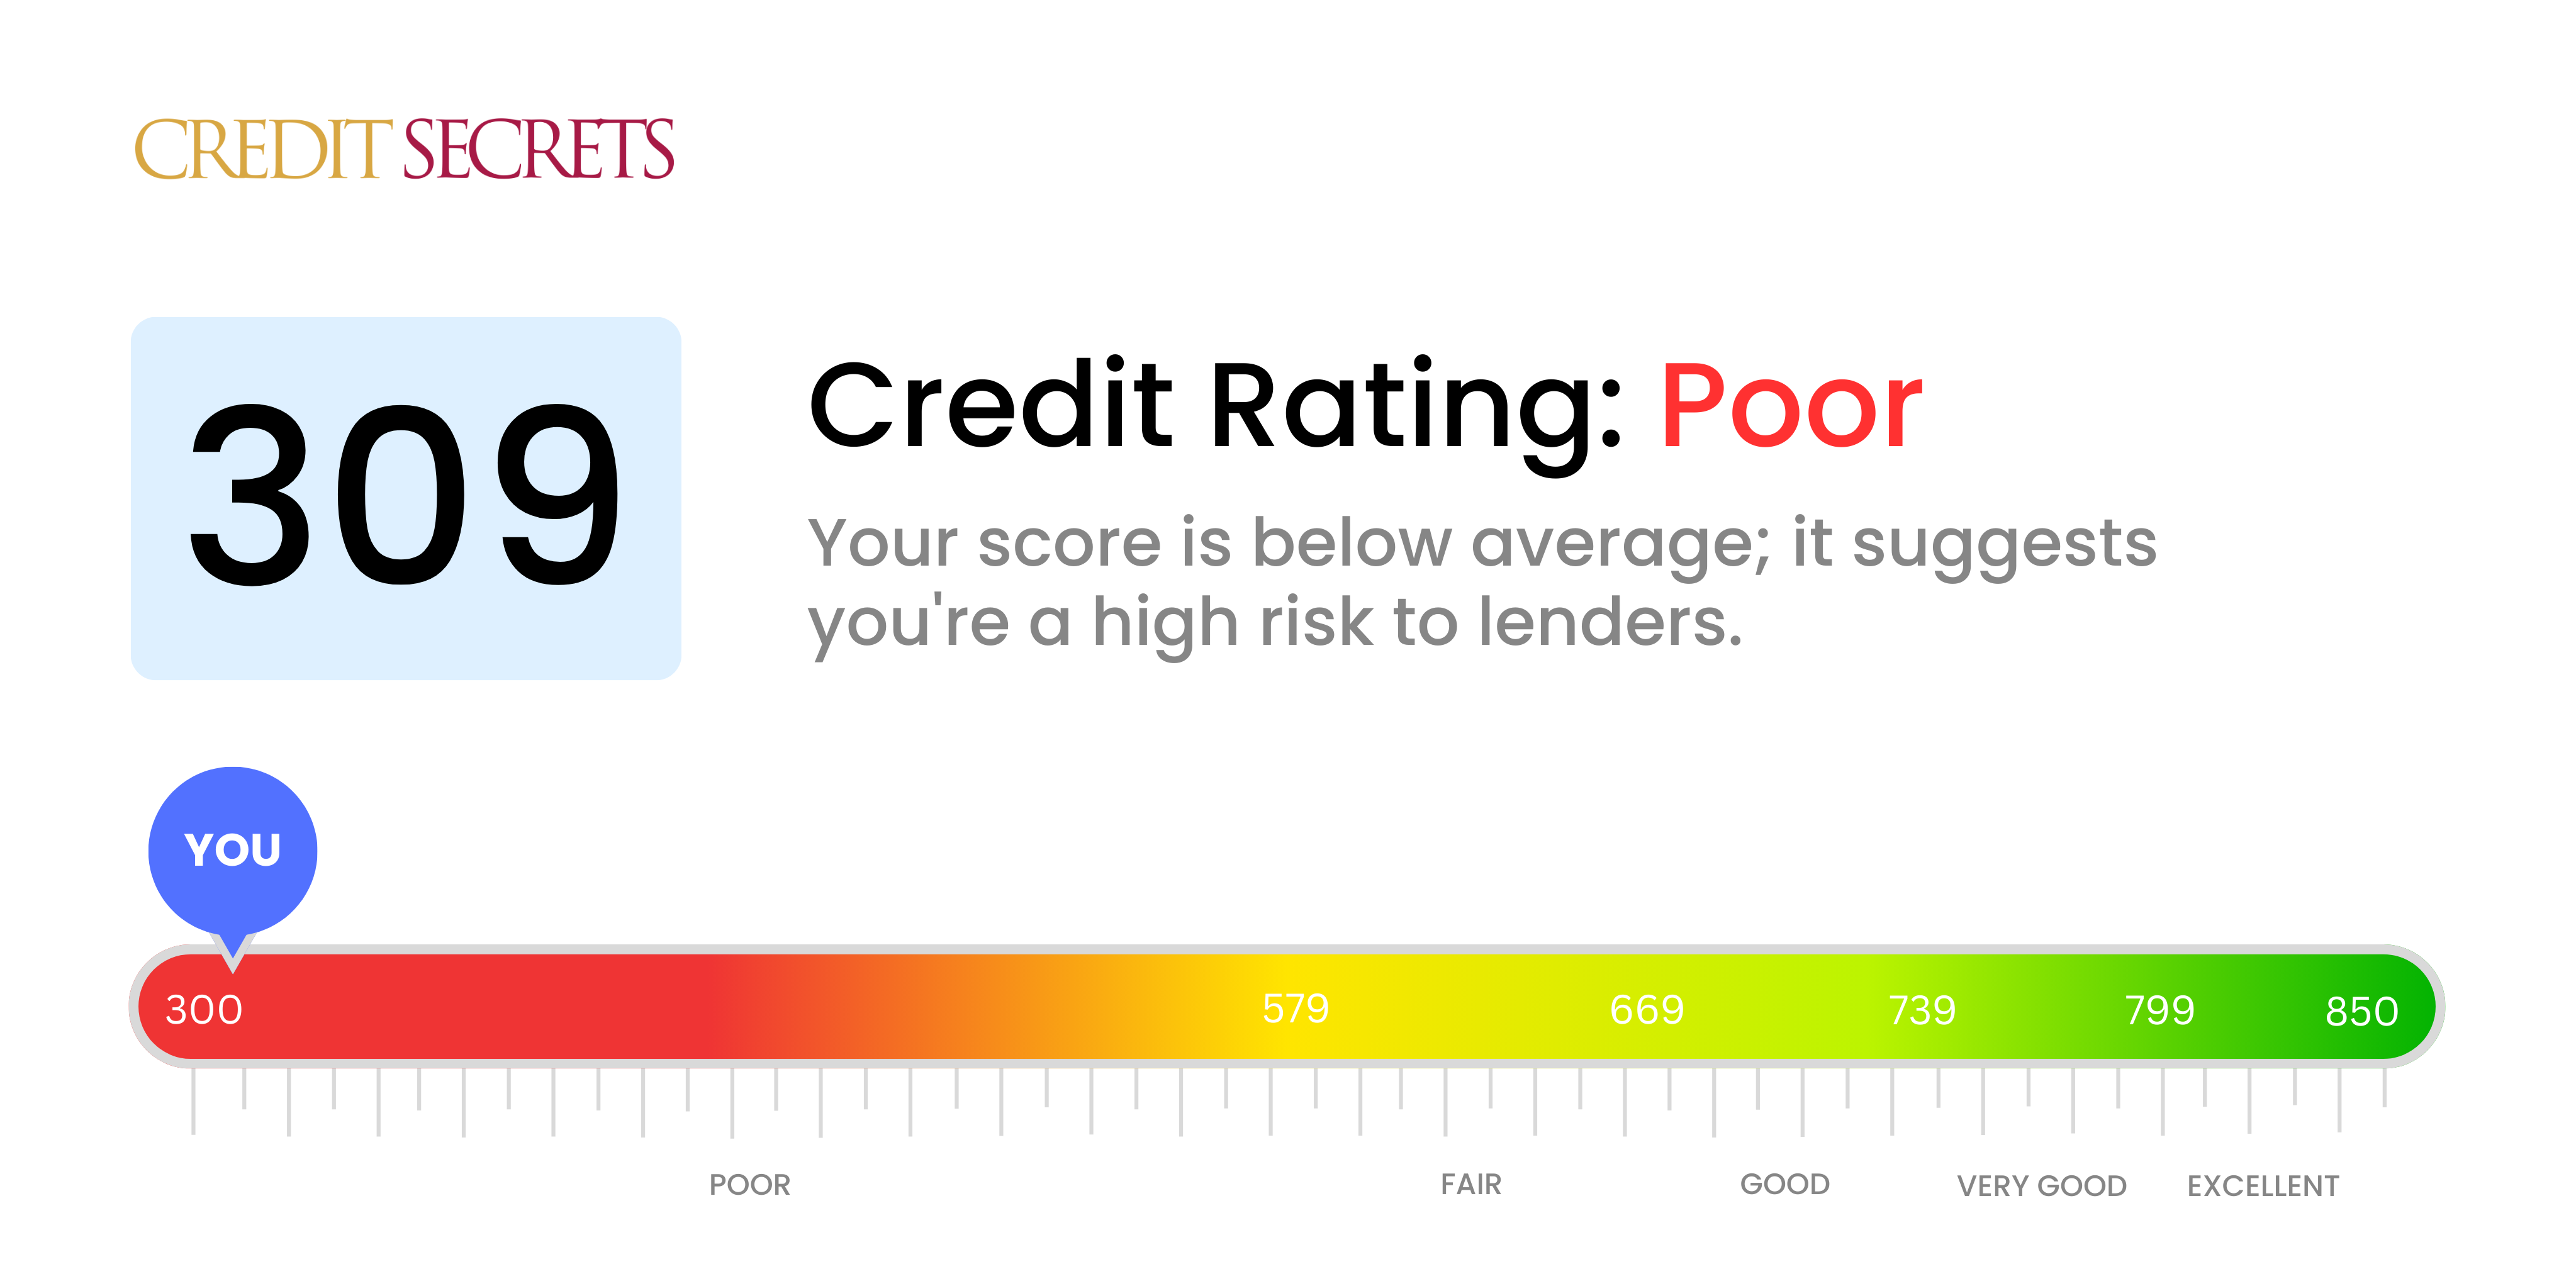 Is 309 a good credit score?